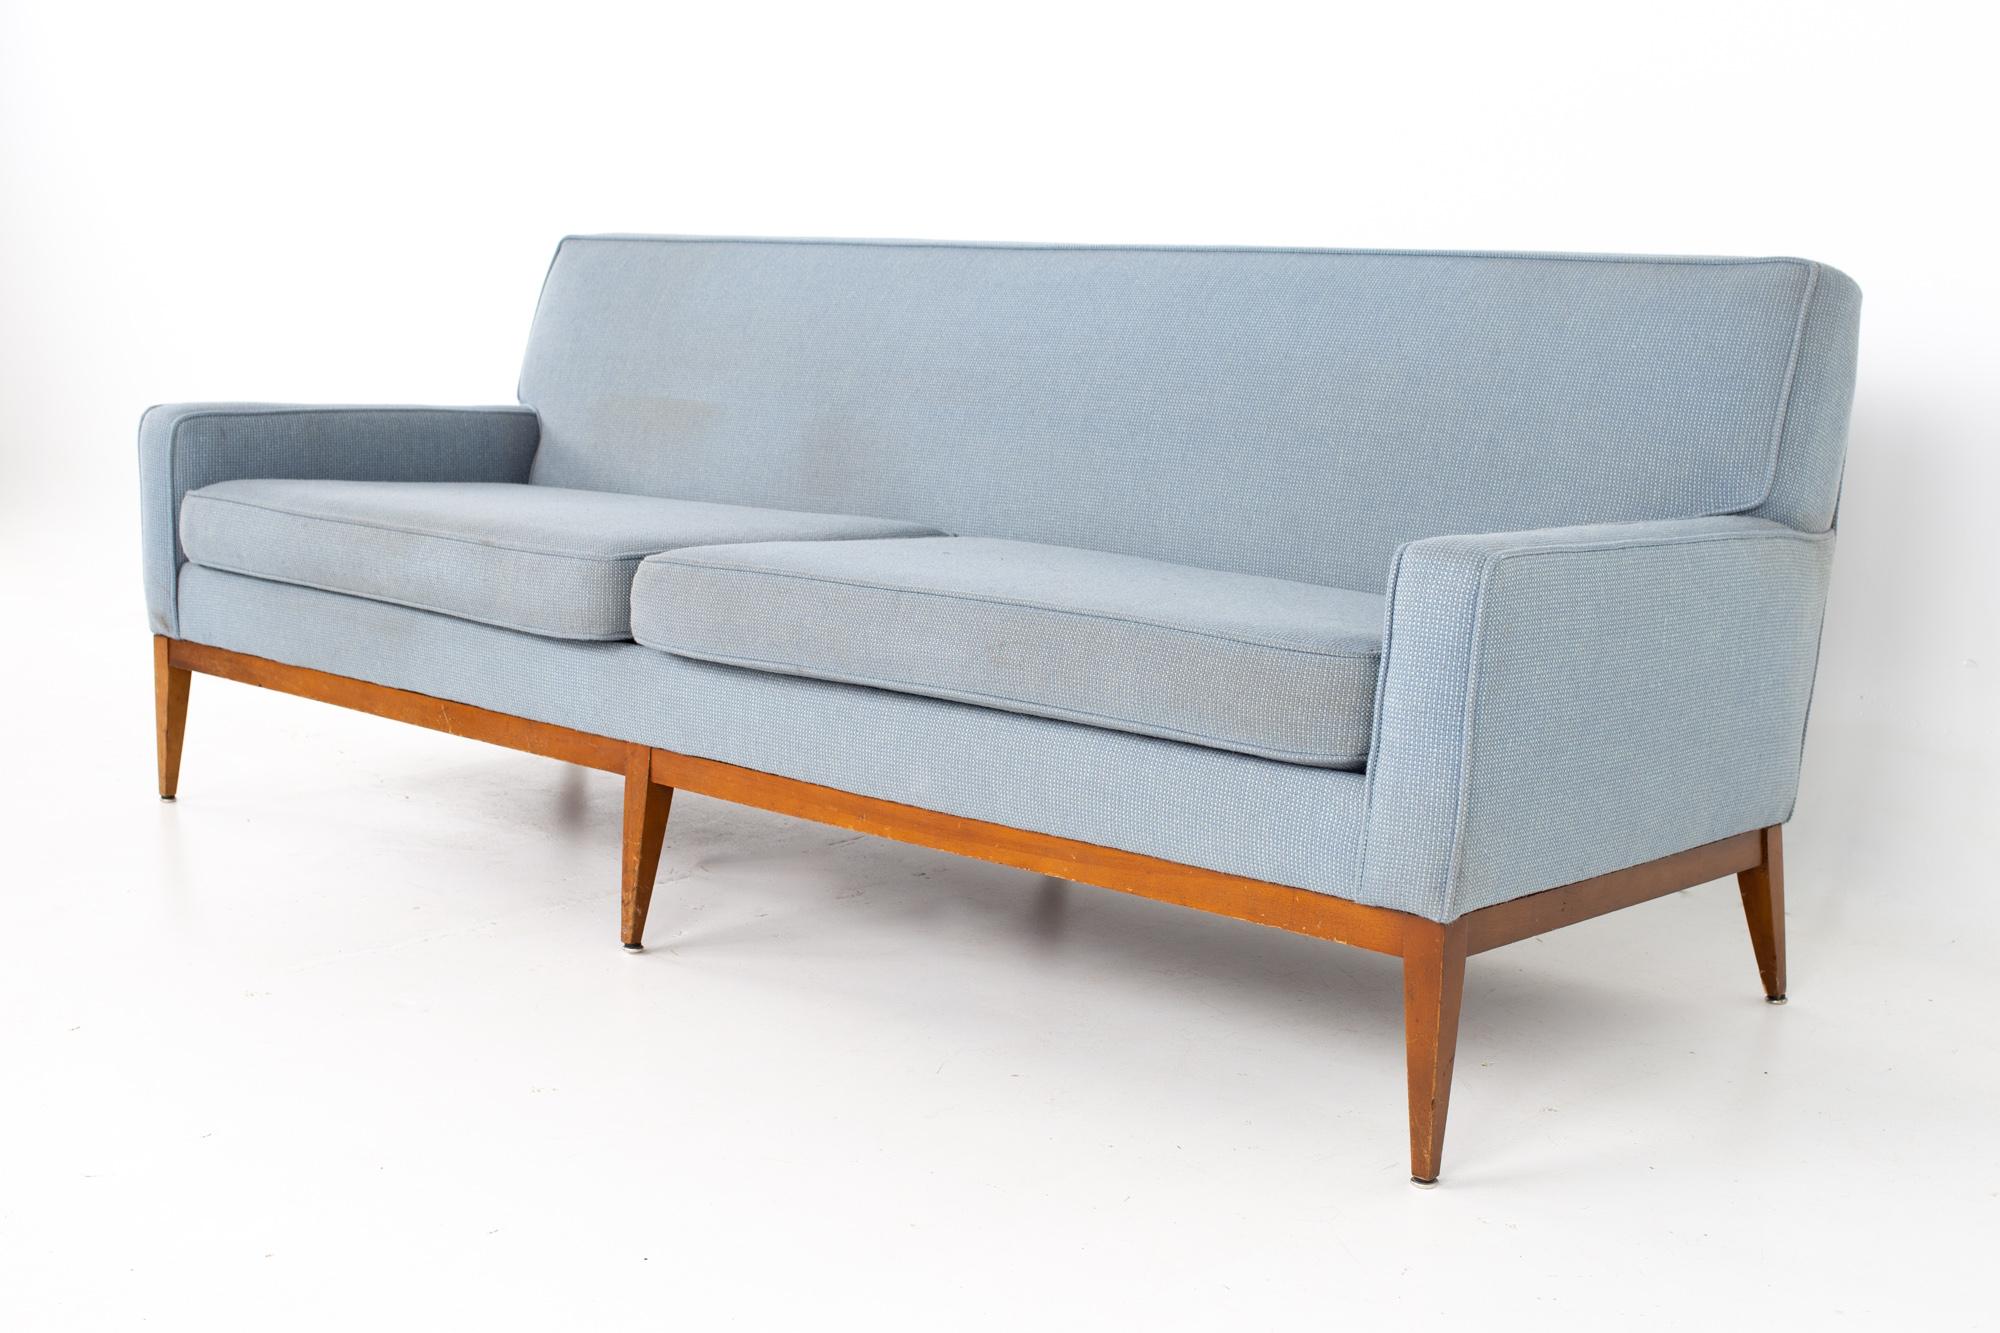 Paul McCobb style mid century blue sofa
Sofa measures: 82.5 wide x 31 deep x 30.5 high, with a seat height of 18 inches

All pieces of furniture can be had in what we call restored vintage condition. That means the piece is restored upon purchase